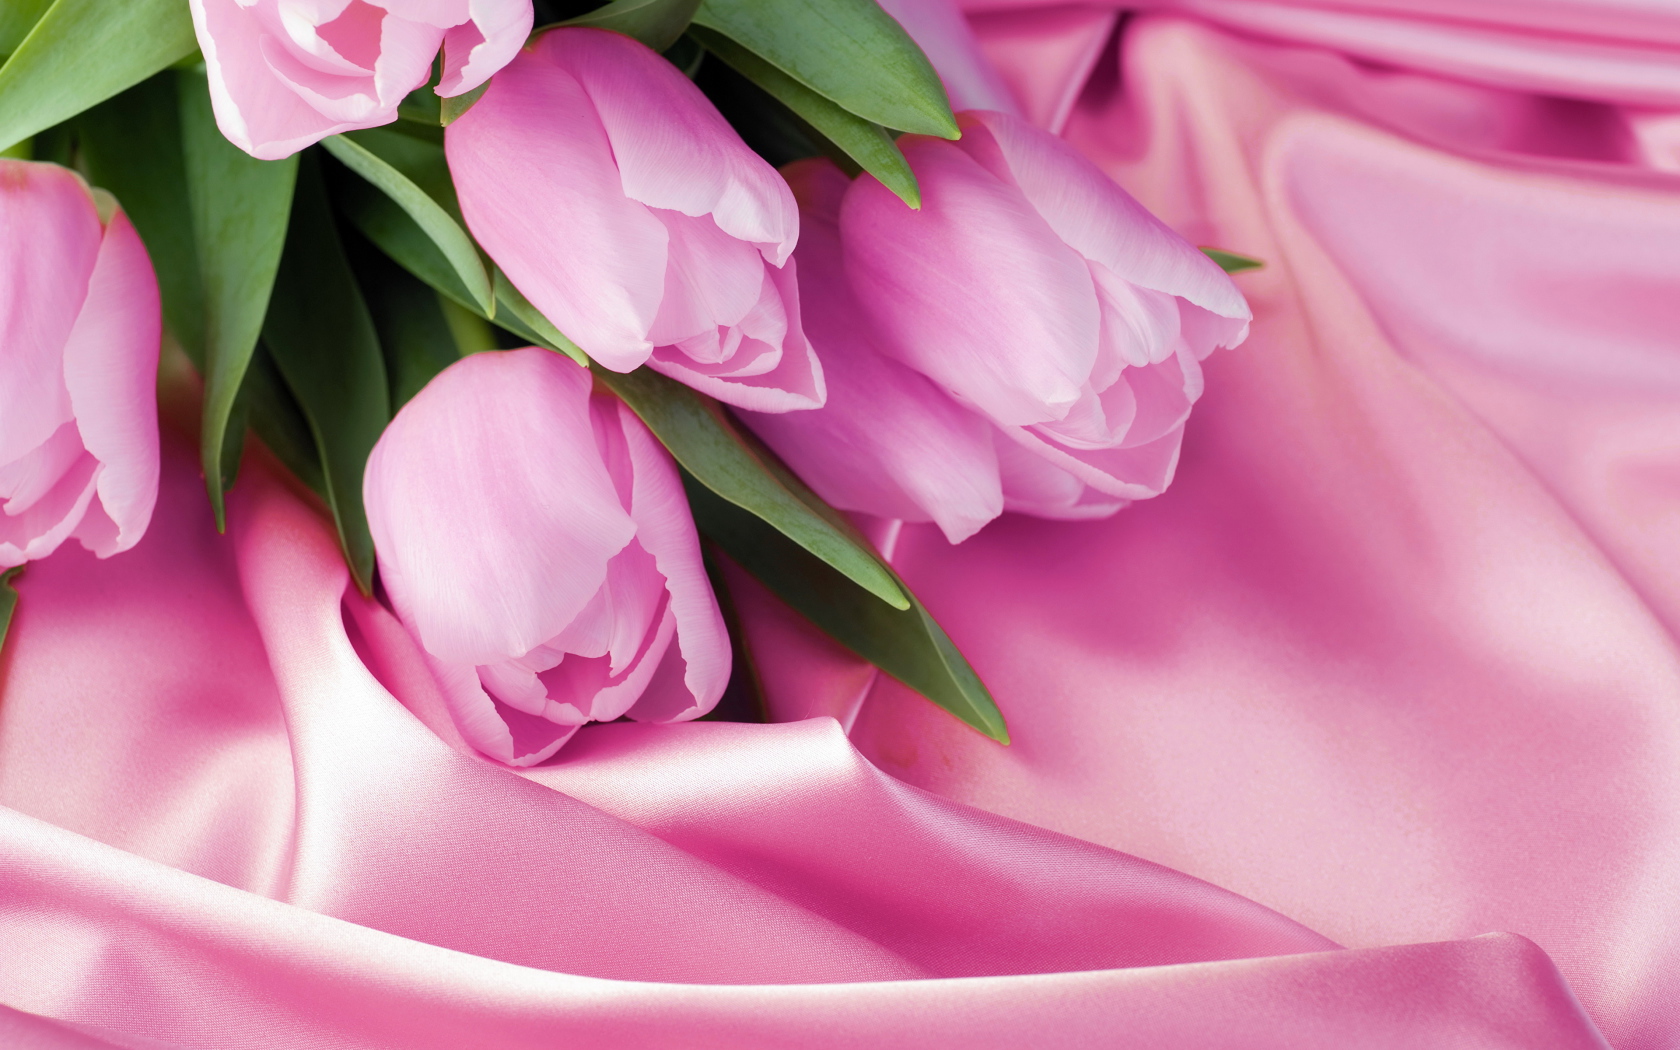 Bouquet of delicate tulips on a pink silk fabric